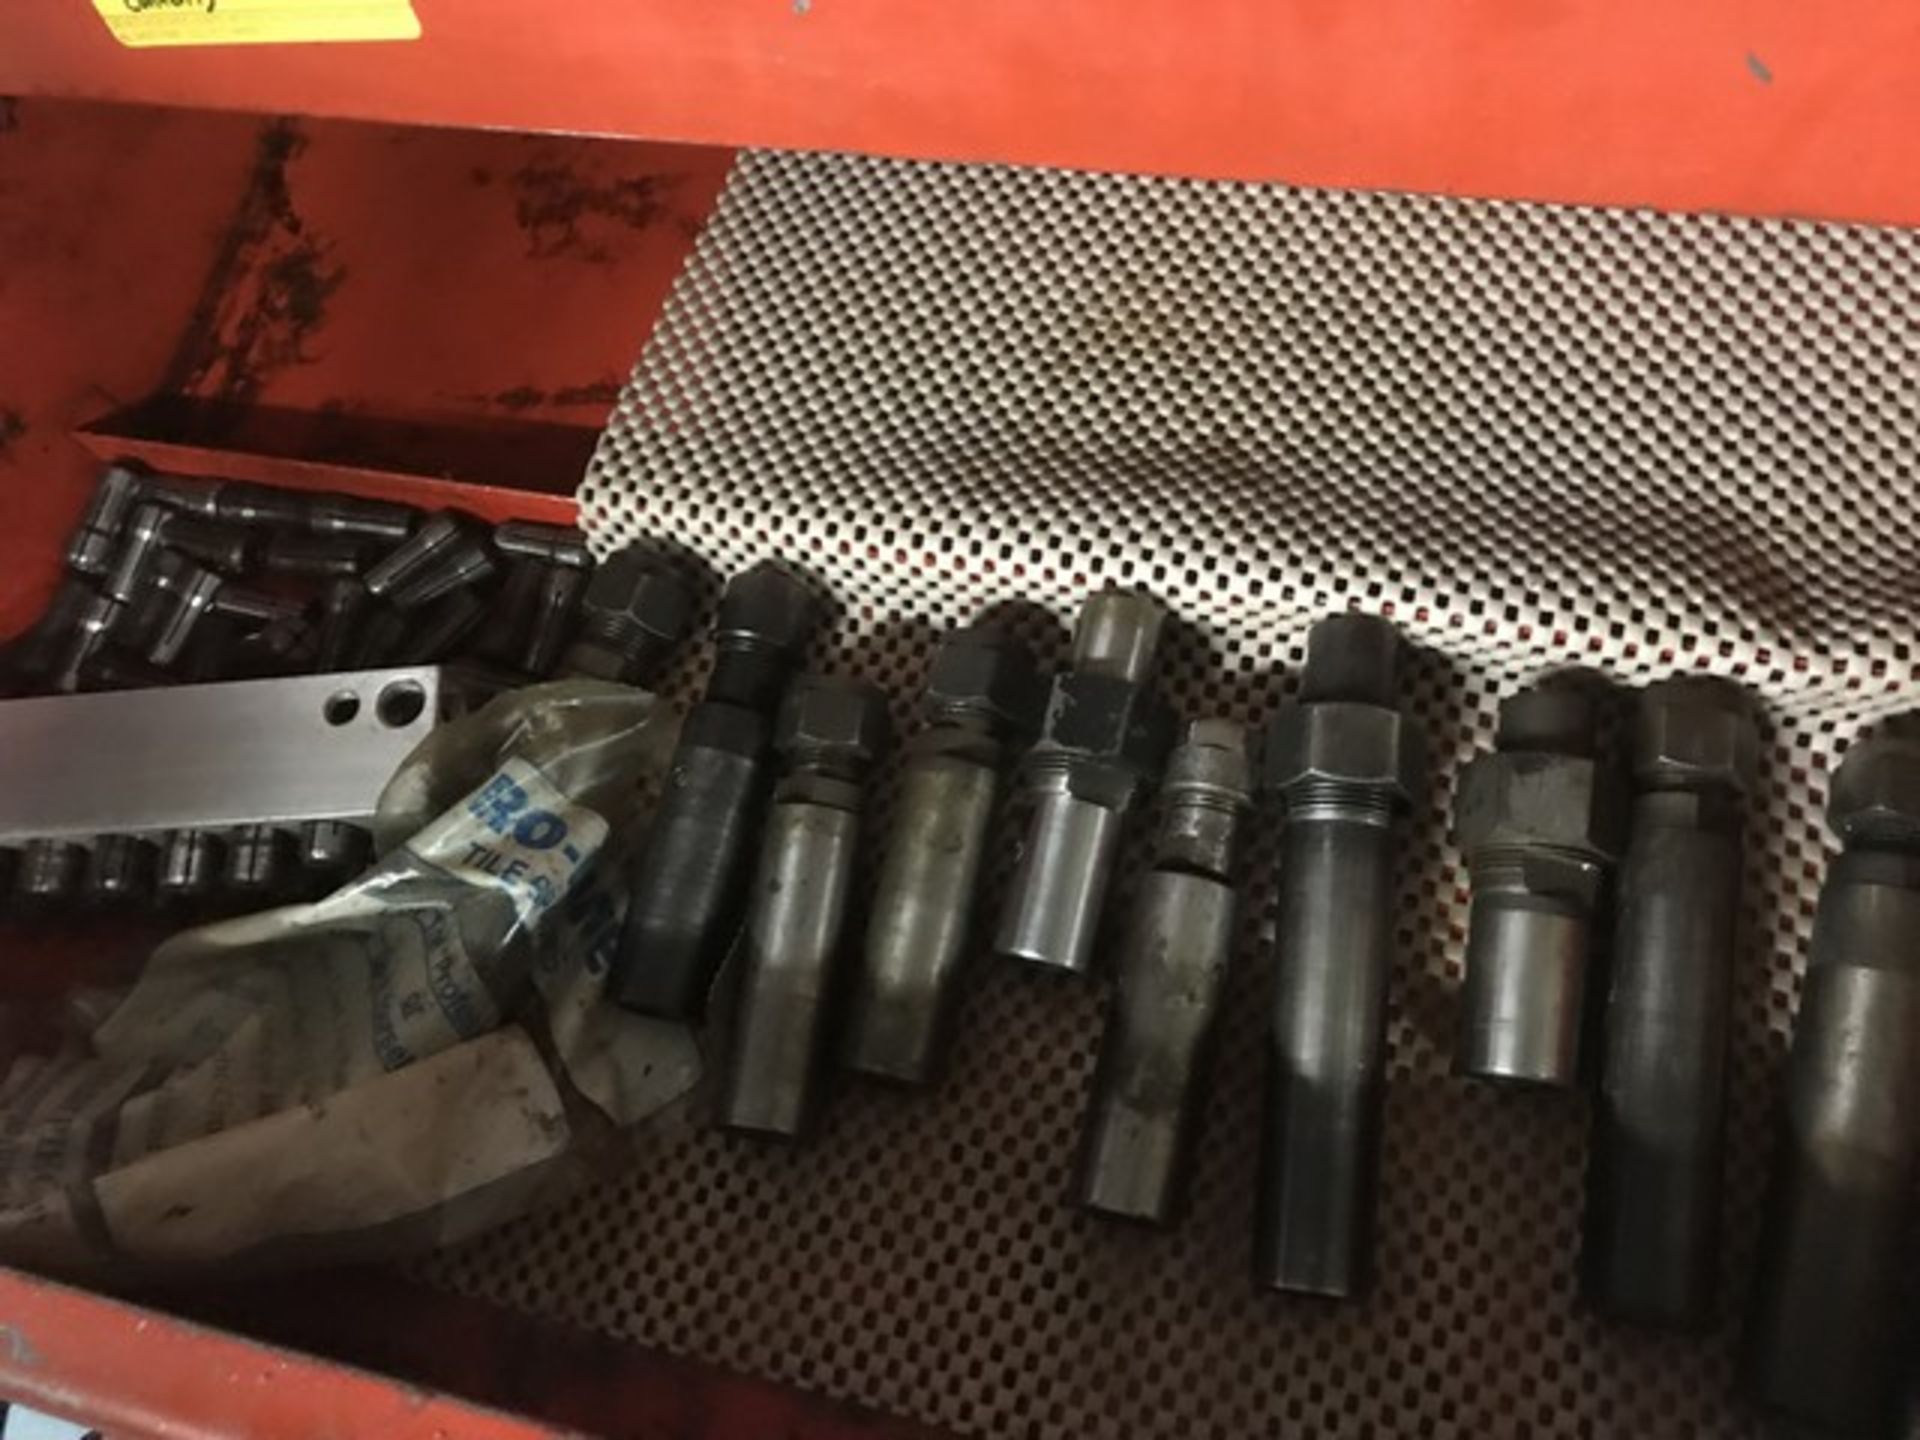 LOT MAZAK SCREW MACHINE COLLETS, ETC (CONTENTS OF SNAP-ON TOOL BOX) - Image 2 of 3